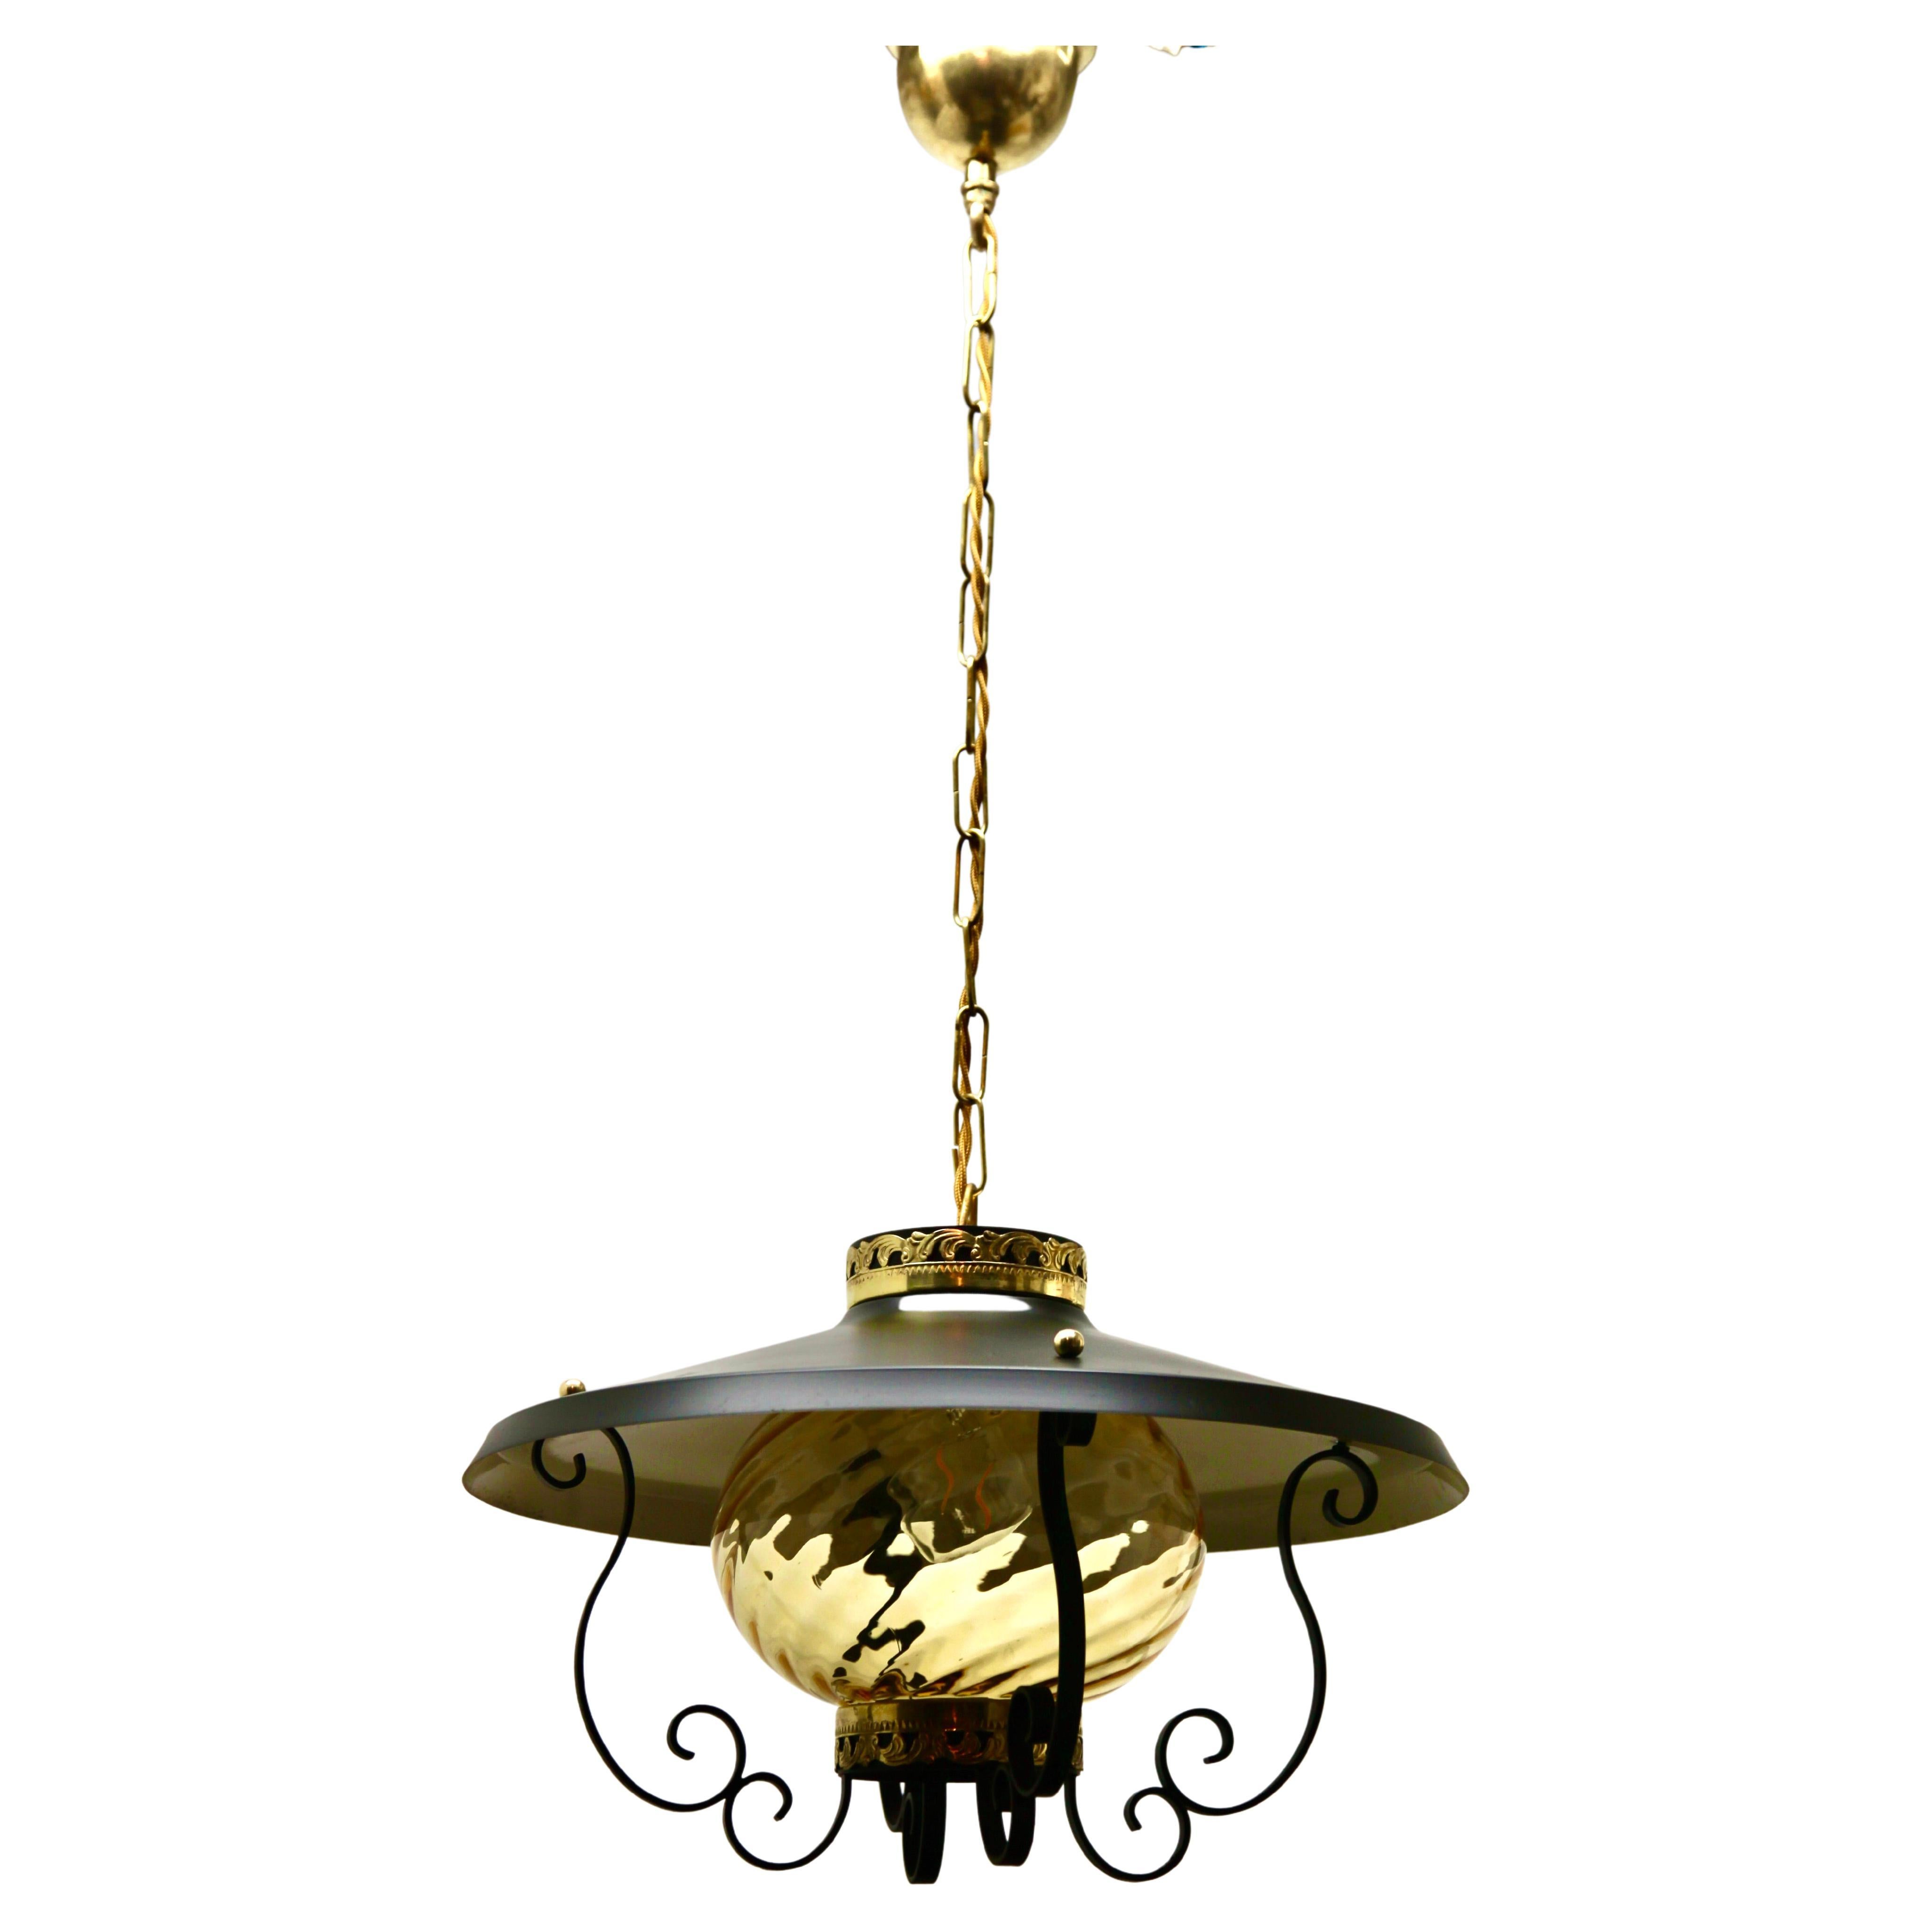 Forget and ribbed glass pendant lamp
Materials:  Ribbed glass globe lampshade. Black painted curved iron slats pleated as a cage. Brass ornamental nuts, screws and parts. Brass chain and canopy. New E27 socket.

Complete restoration
Been